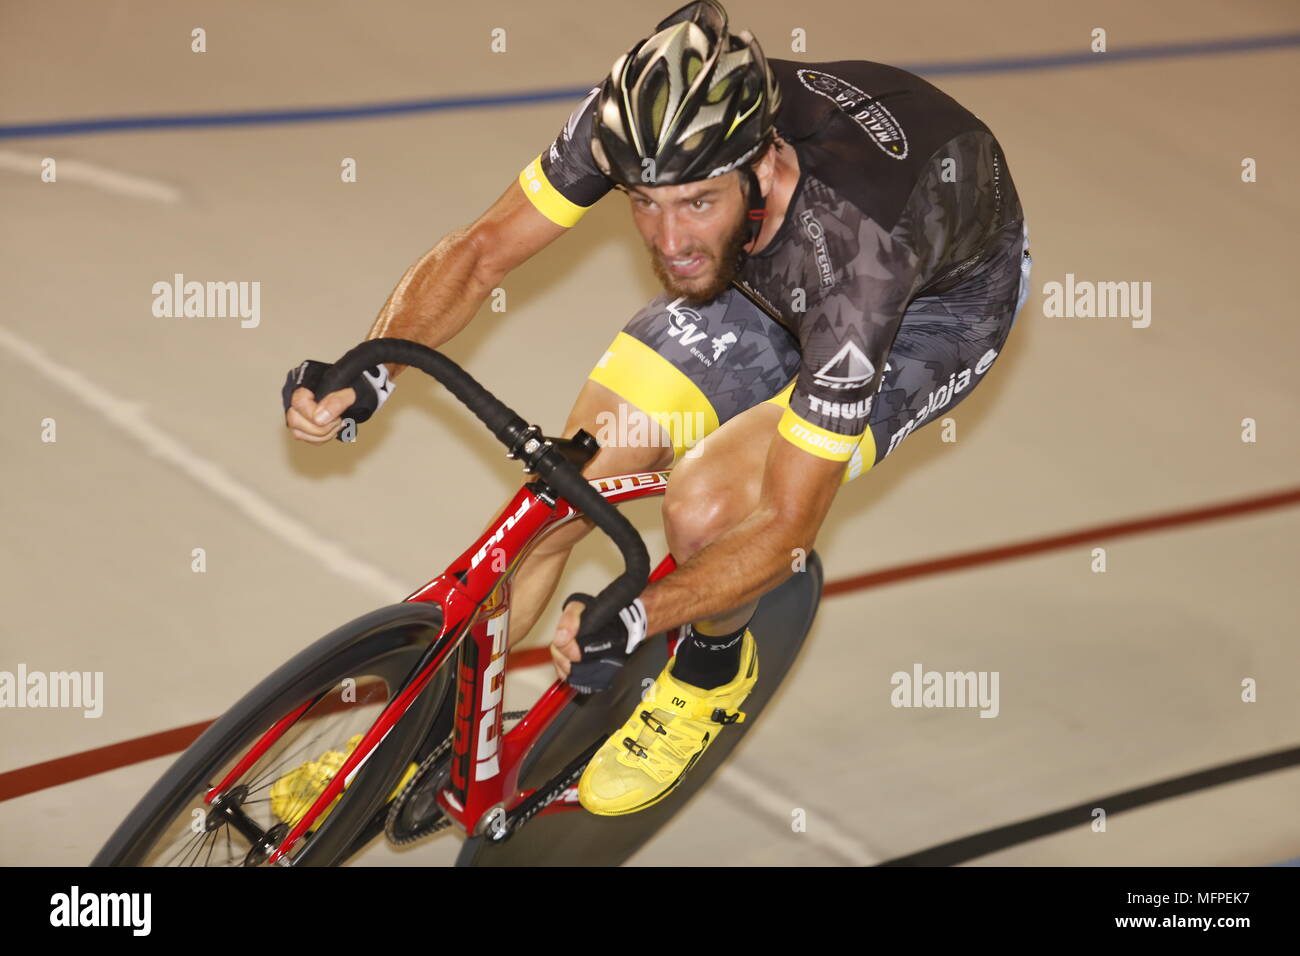 A bicycle track racer shows all-out effort as he races for the finish line, Lehigh Valley Cycle Center, Pennsylvania Stock Photo